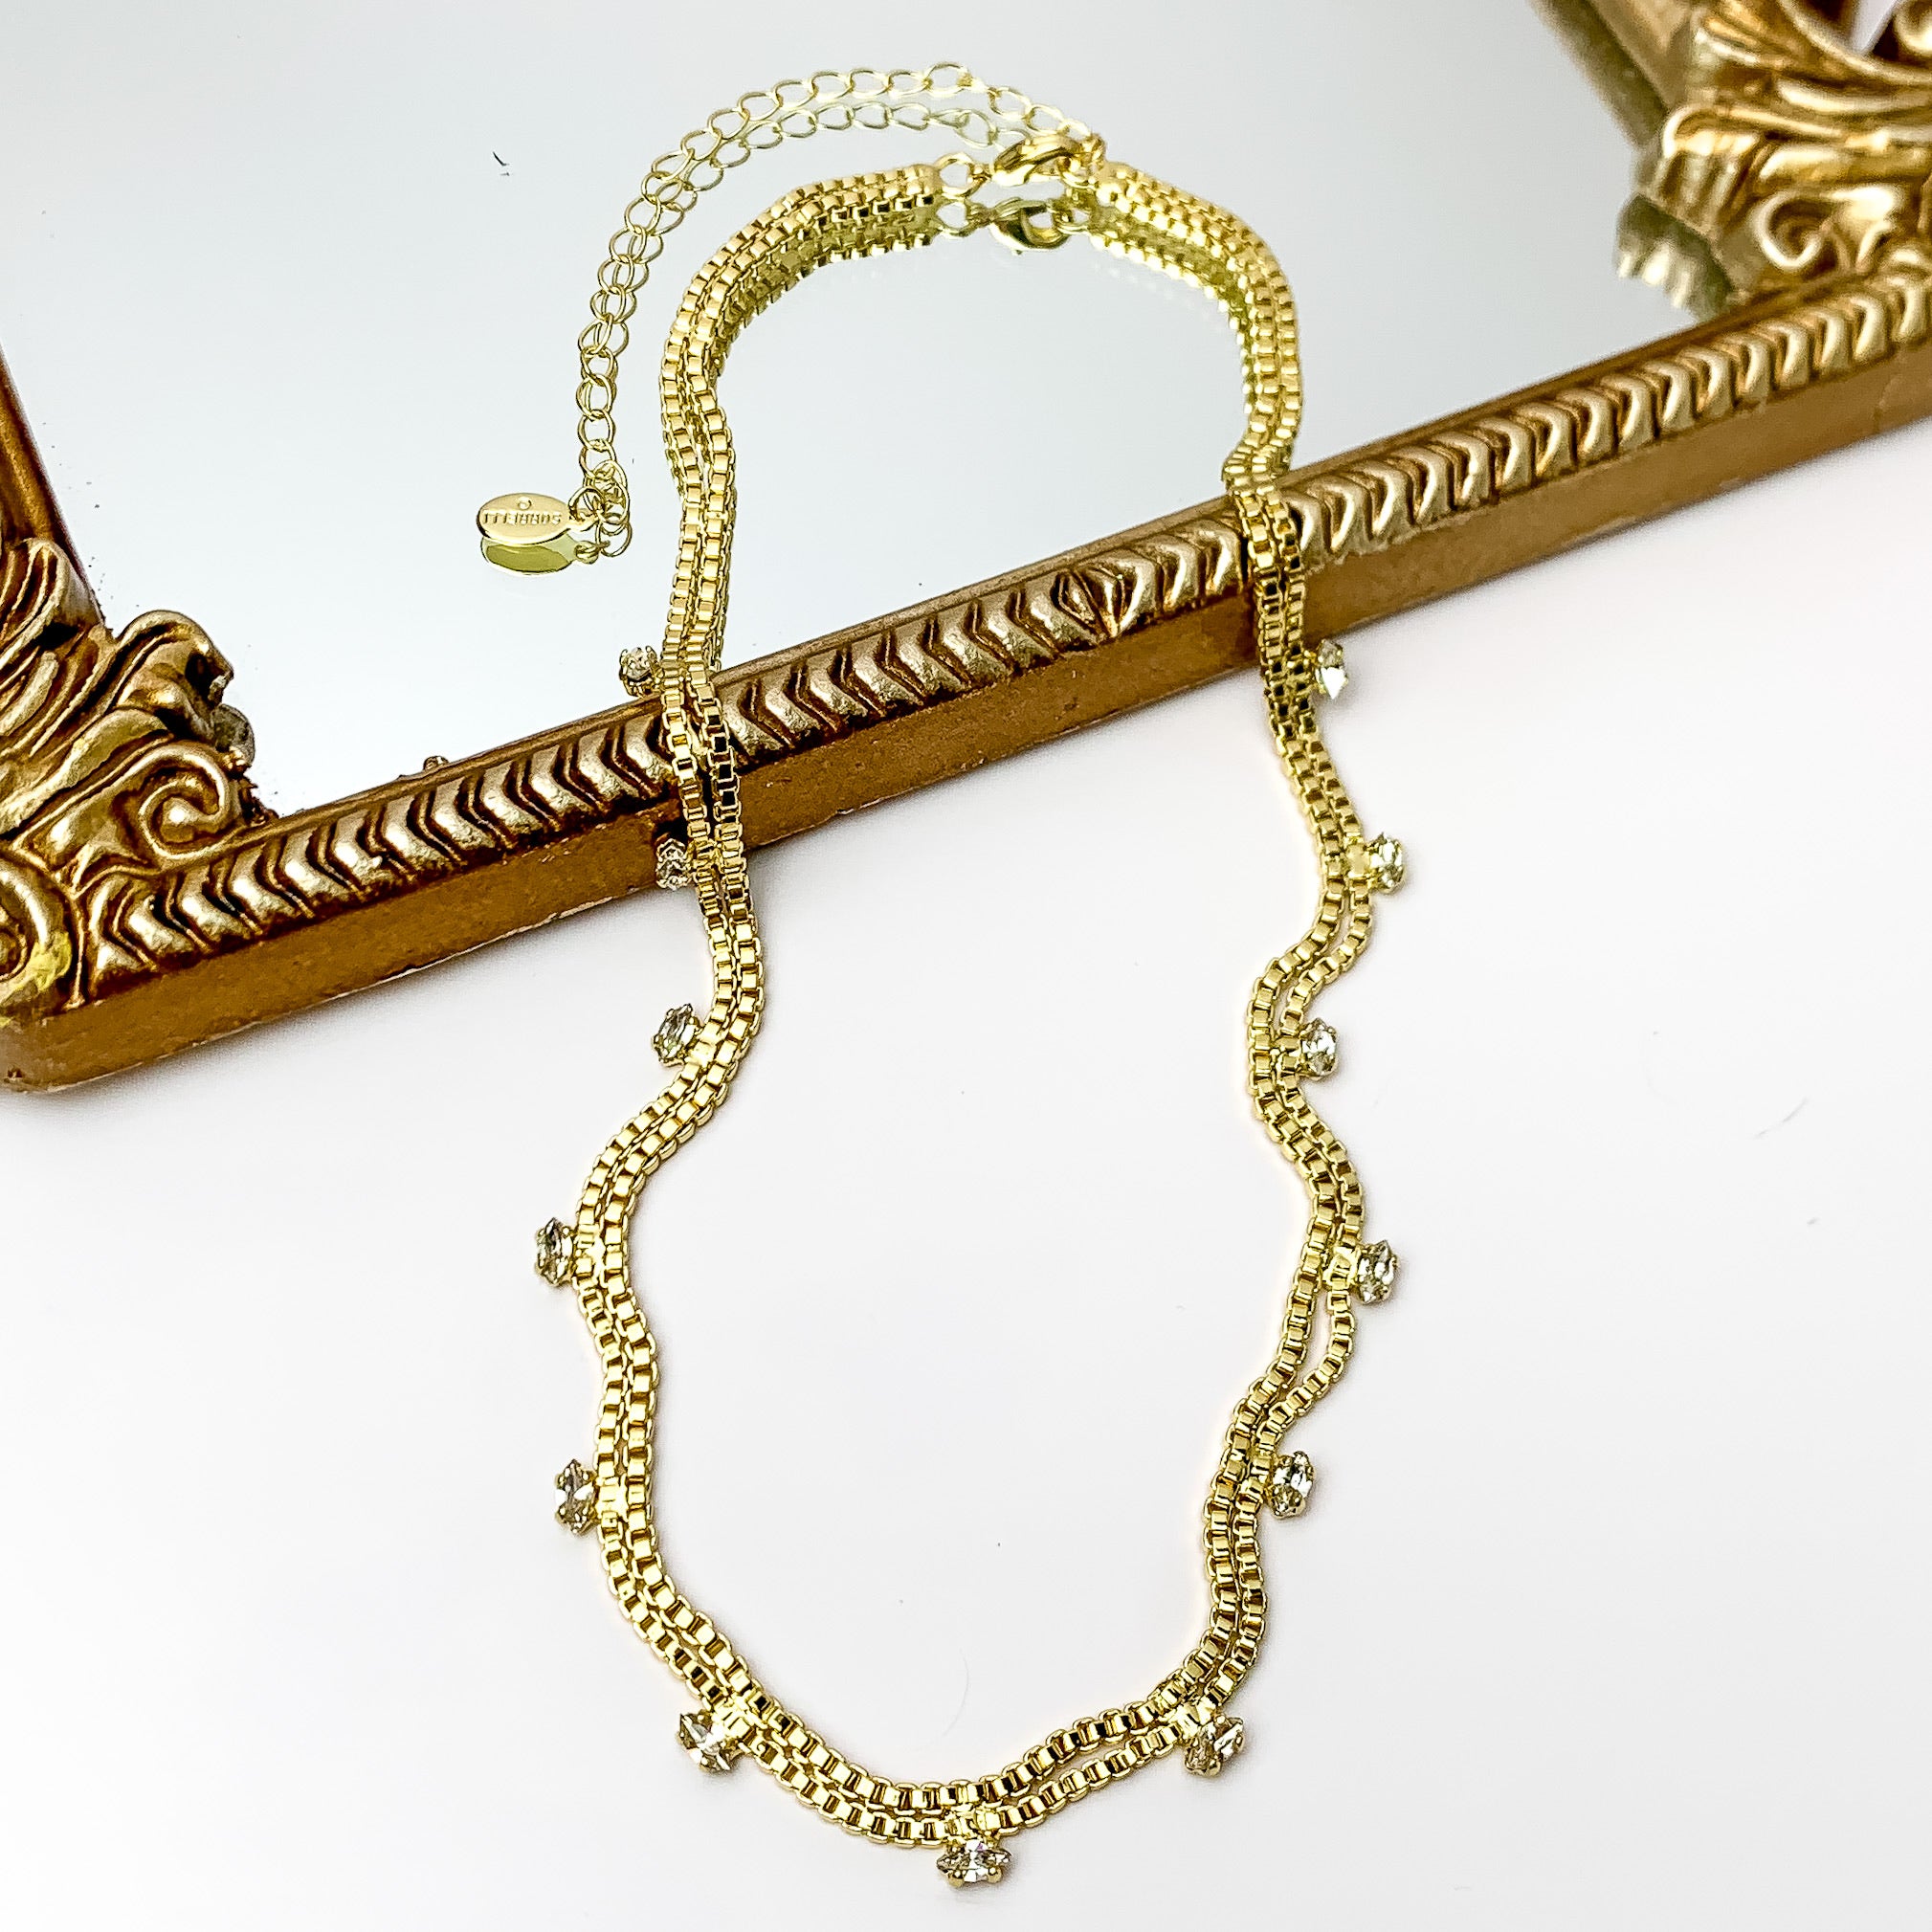 Pictured is a double, gold box chain necklace with clear crystal charm. This necklace is pictured partially laying on a gold mirror on a white background.    